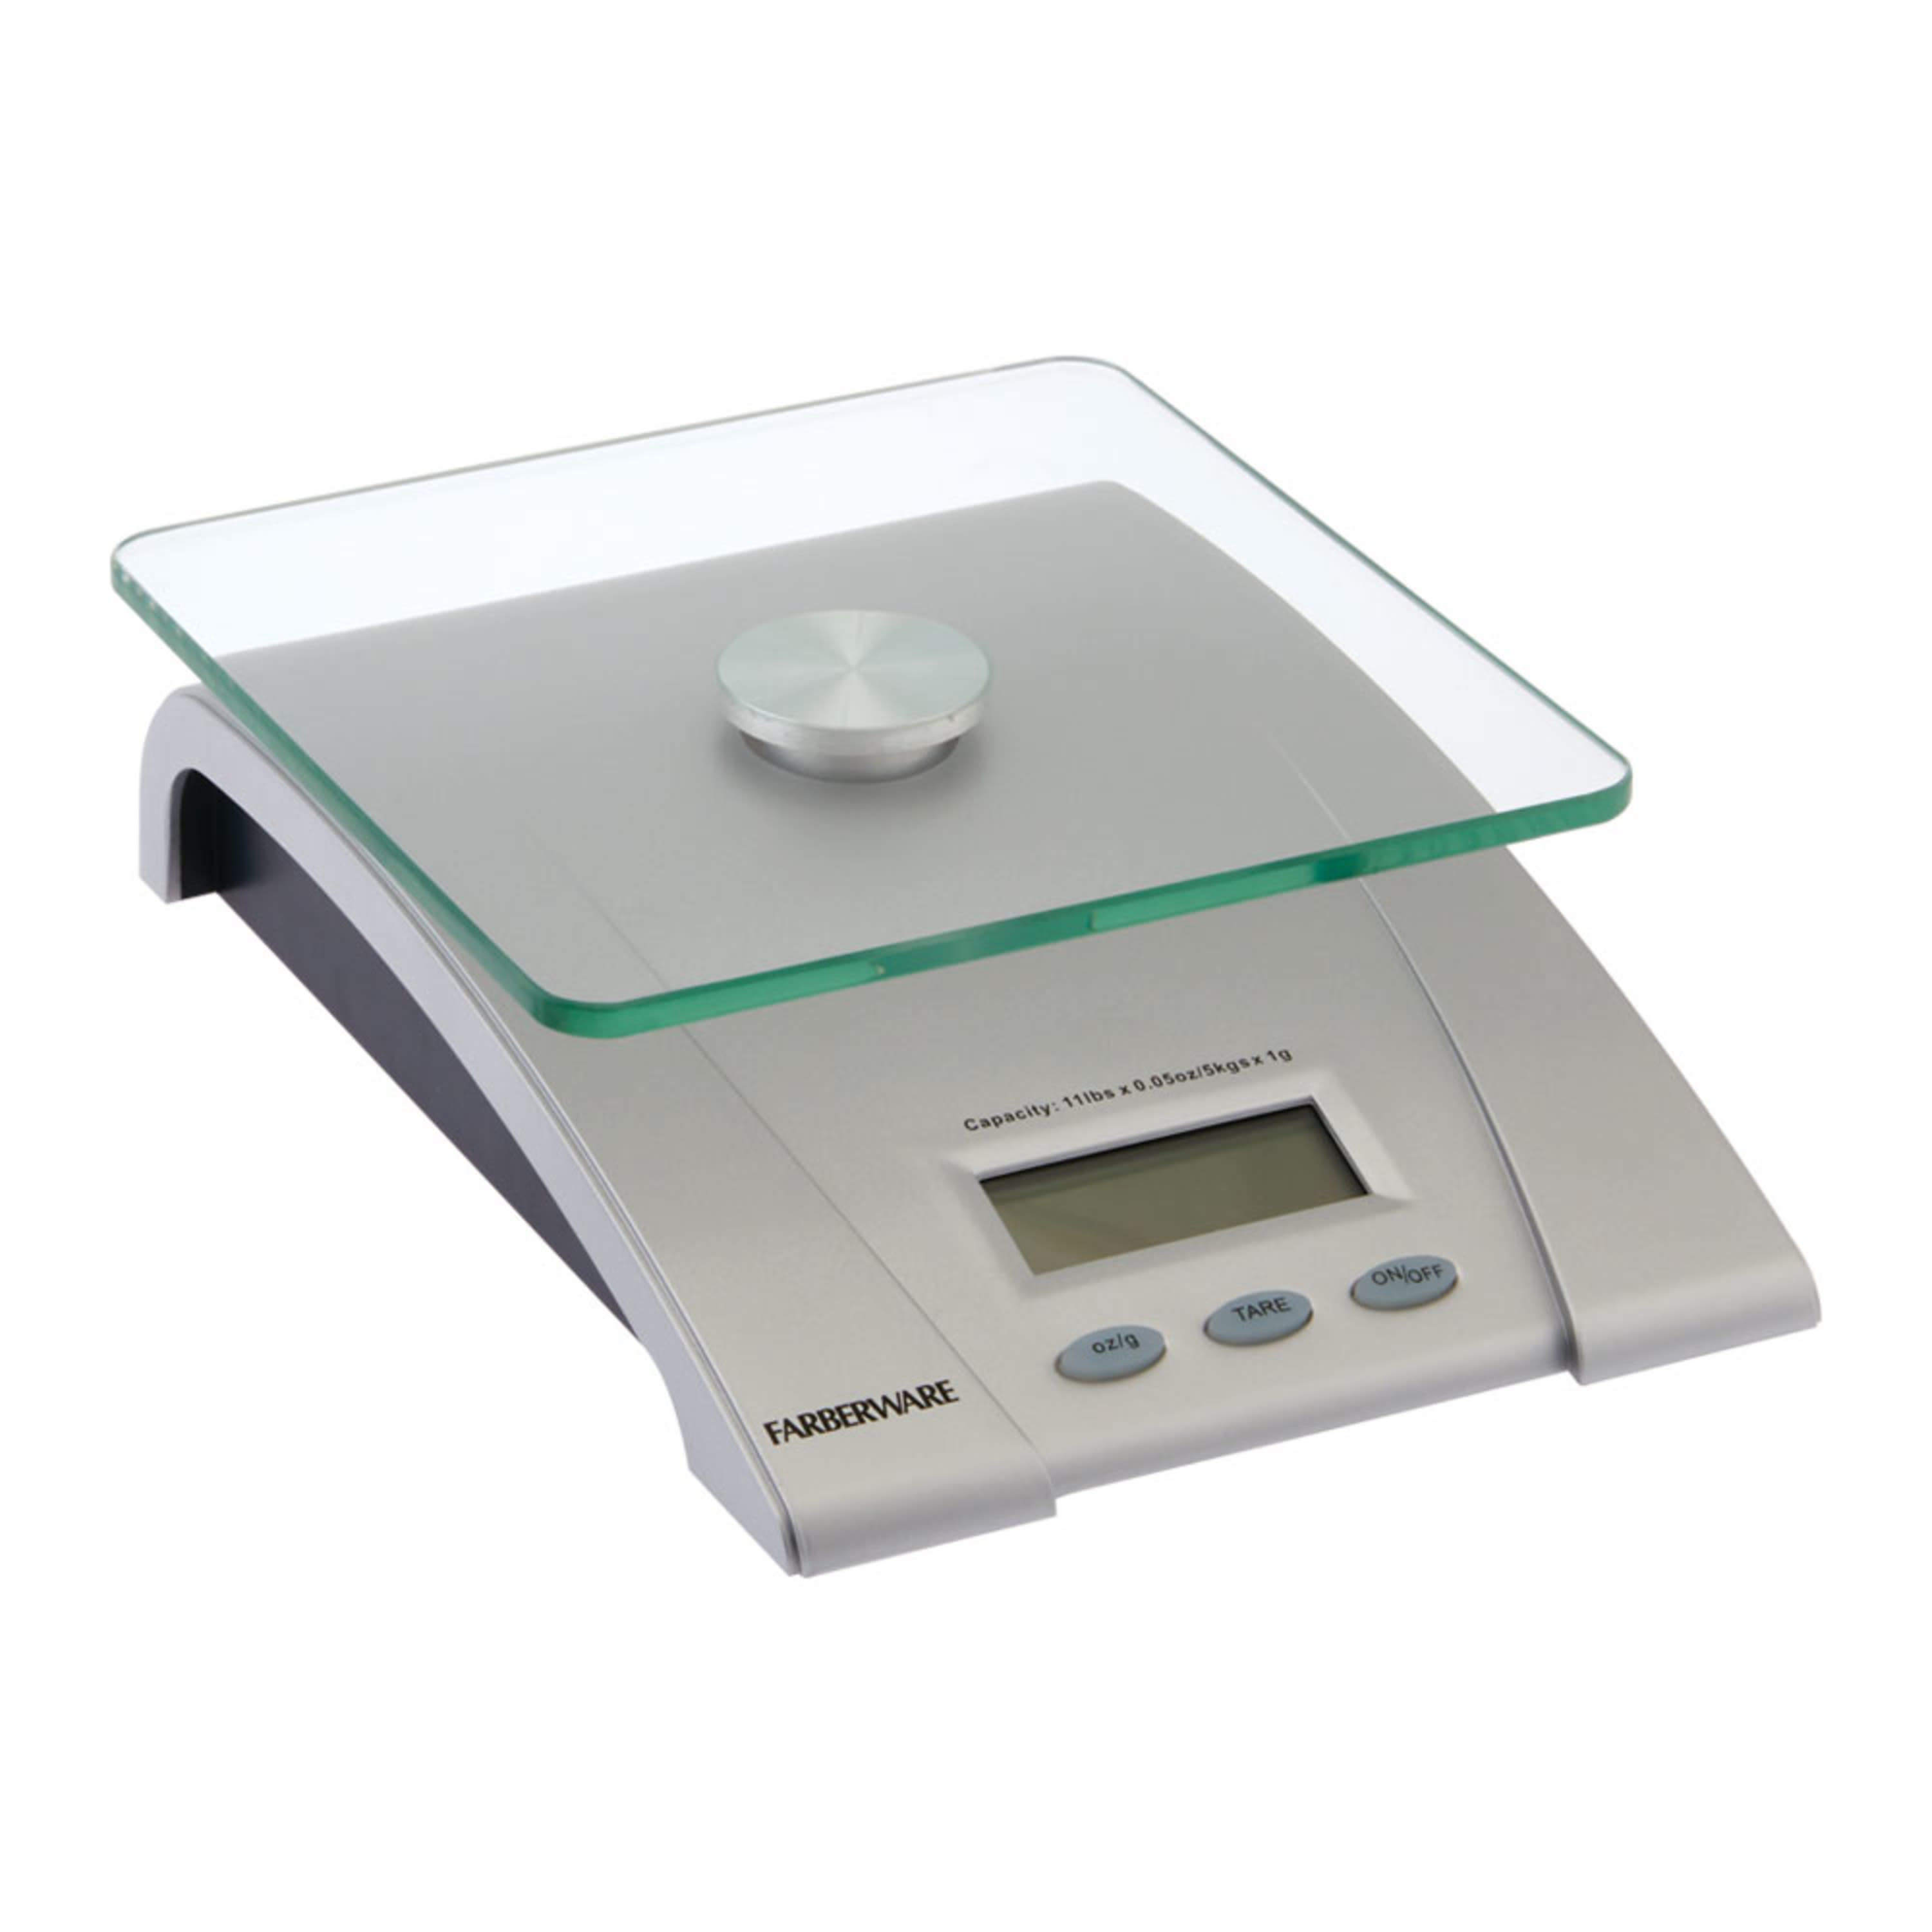 Farberware Professional Electronic Glass Top Kitchen Scale - image 4 of 9